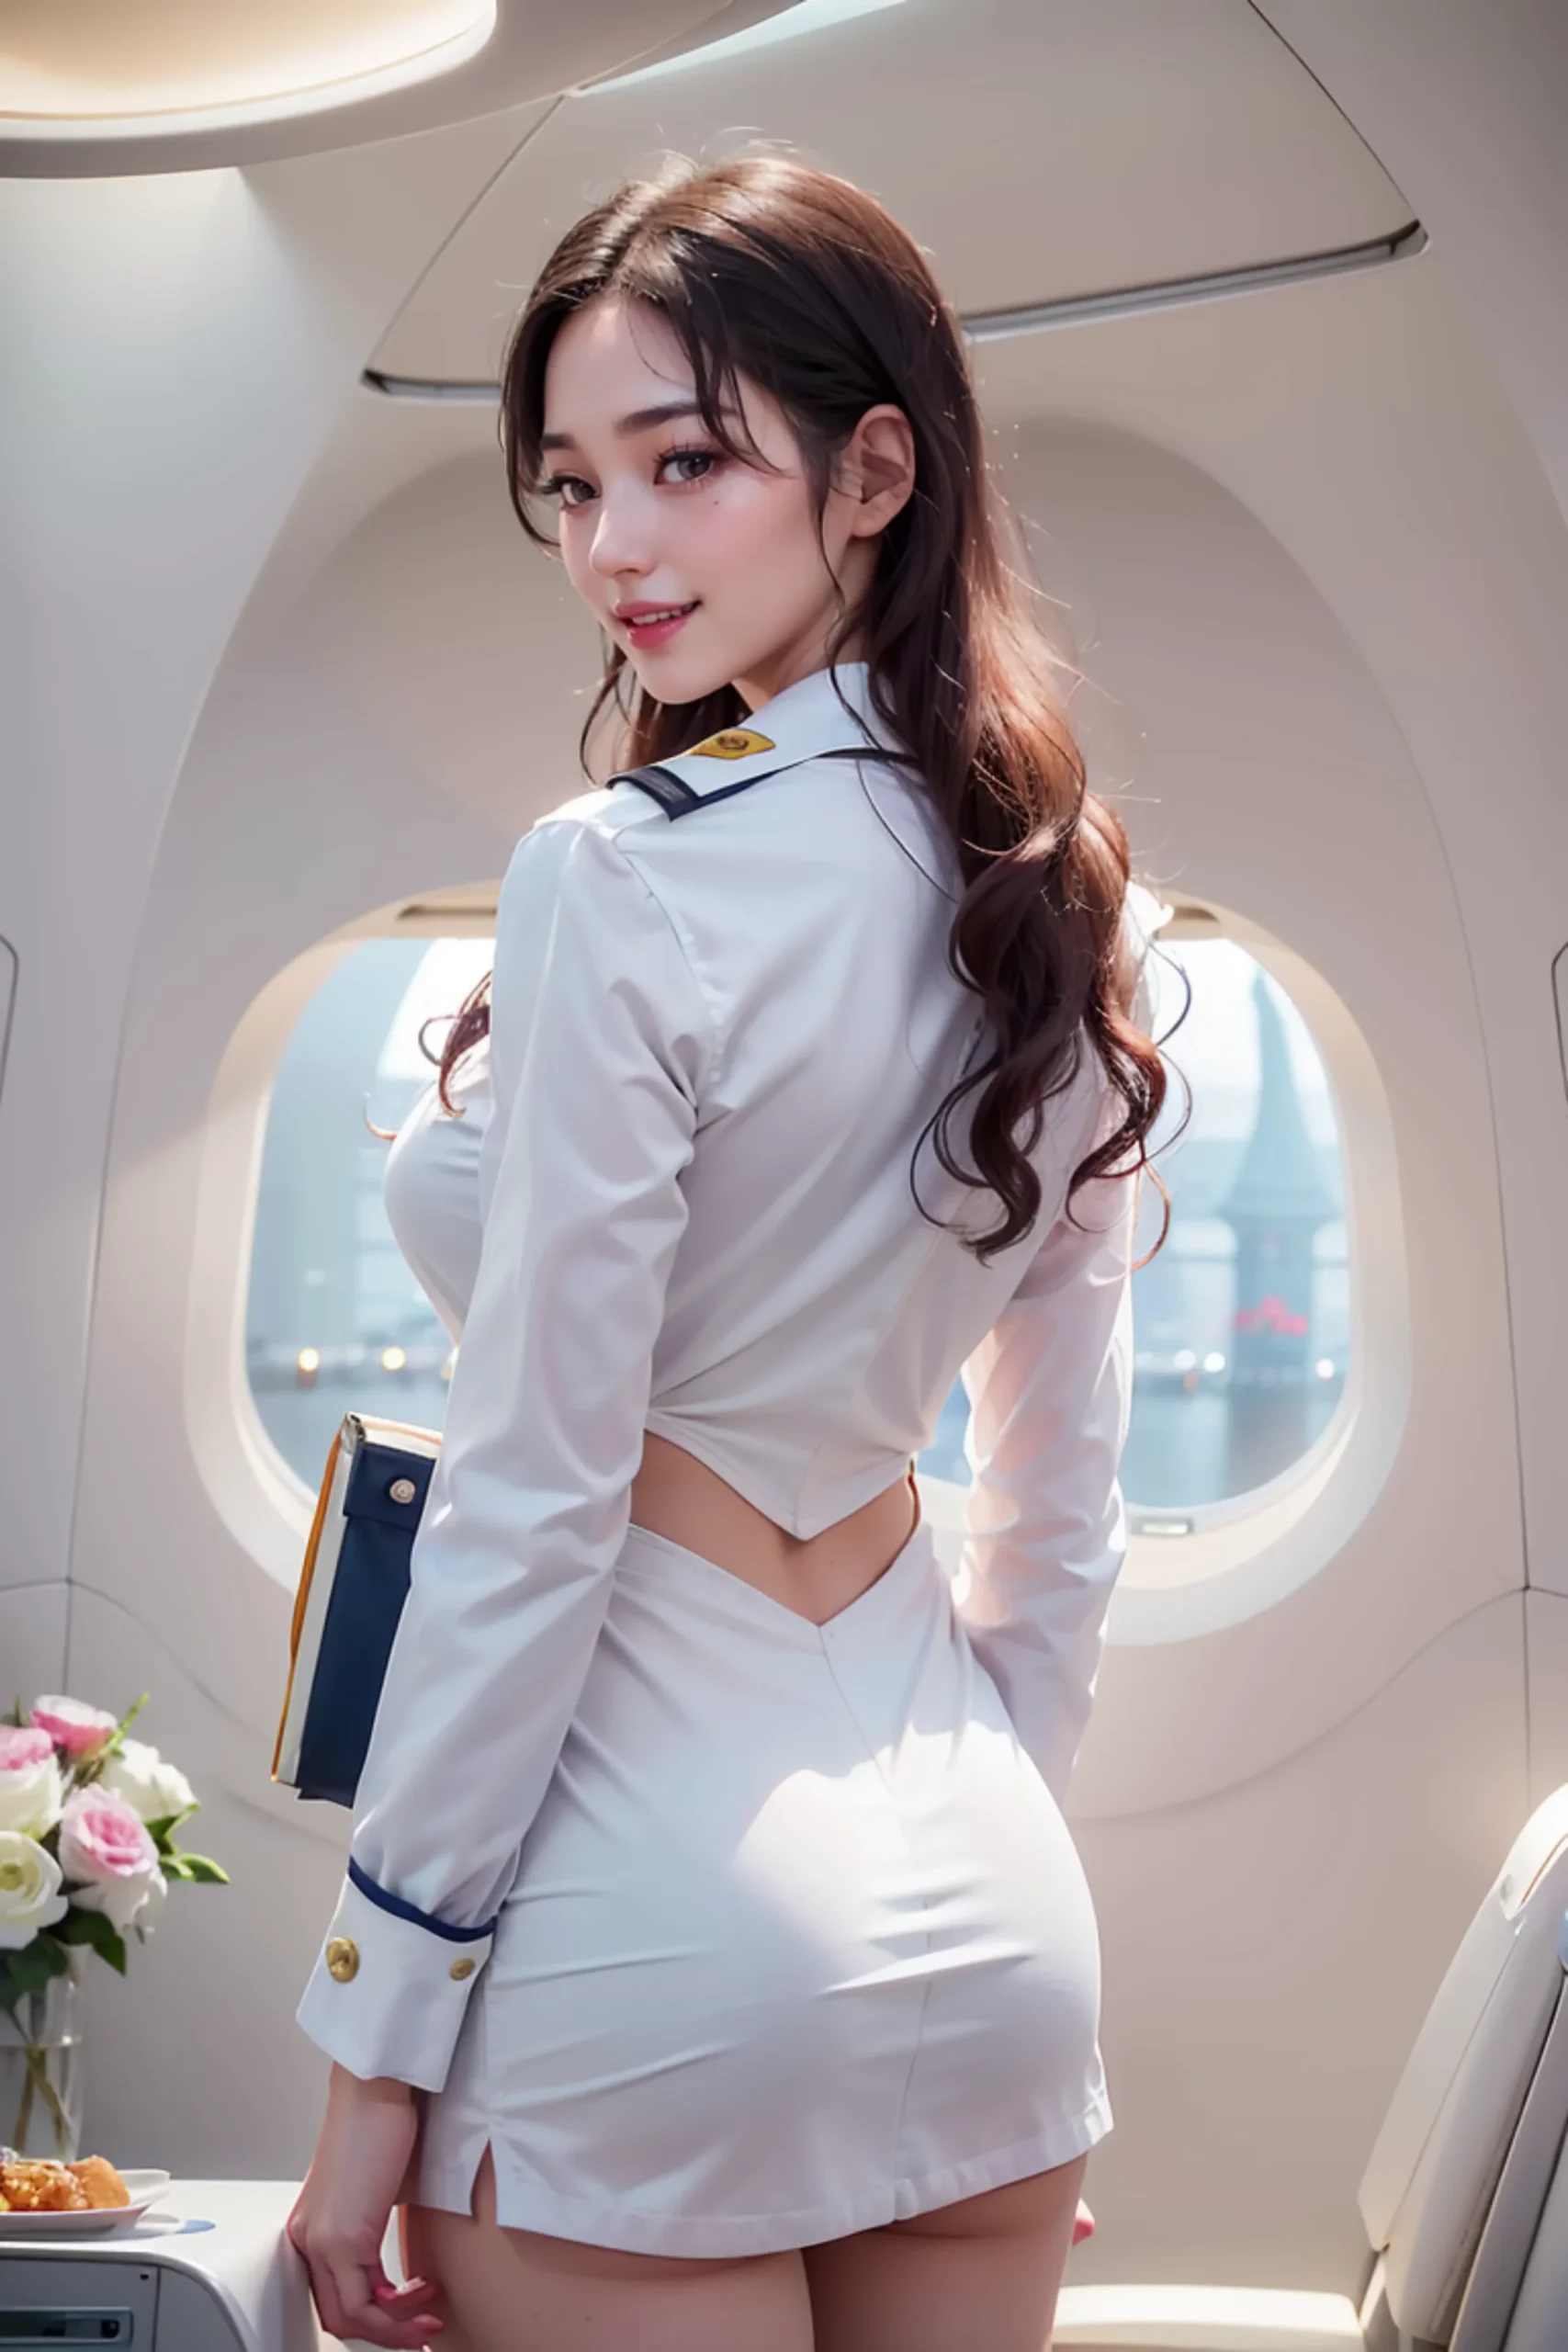 Sexy Flight Attendant Cosplay Vol. 2 Images 15